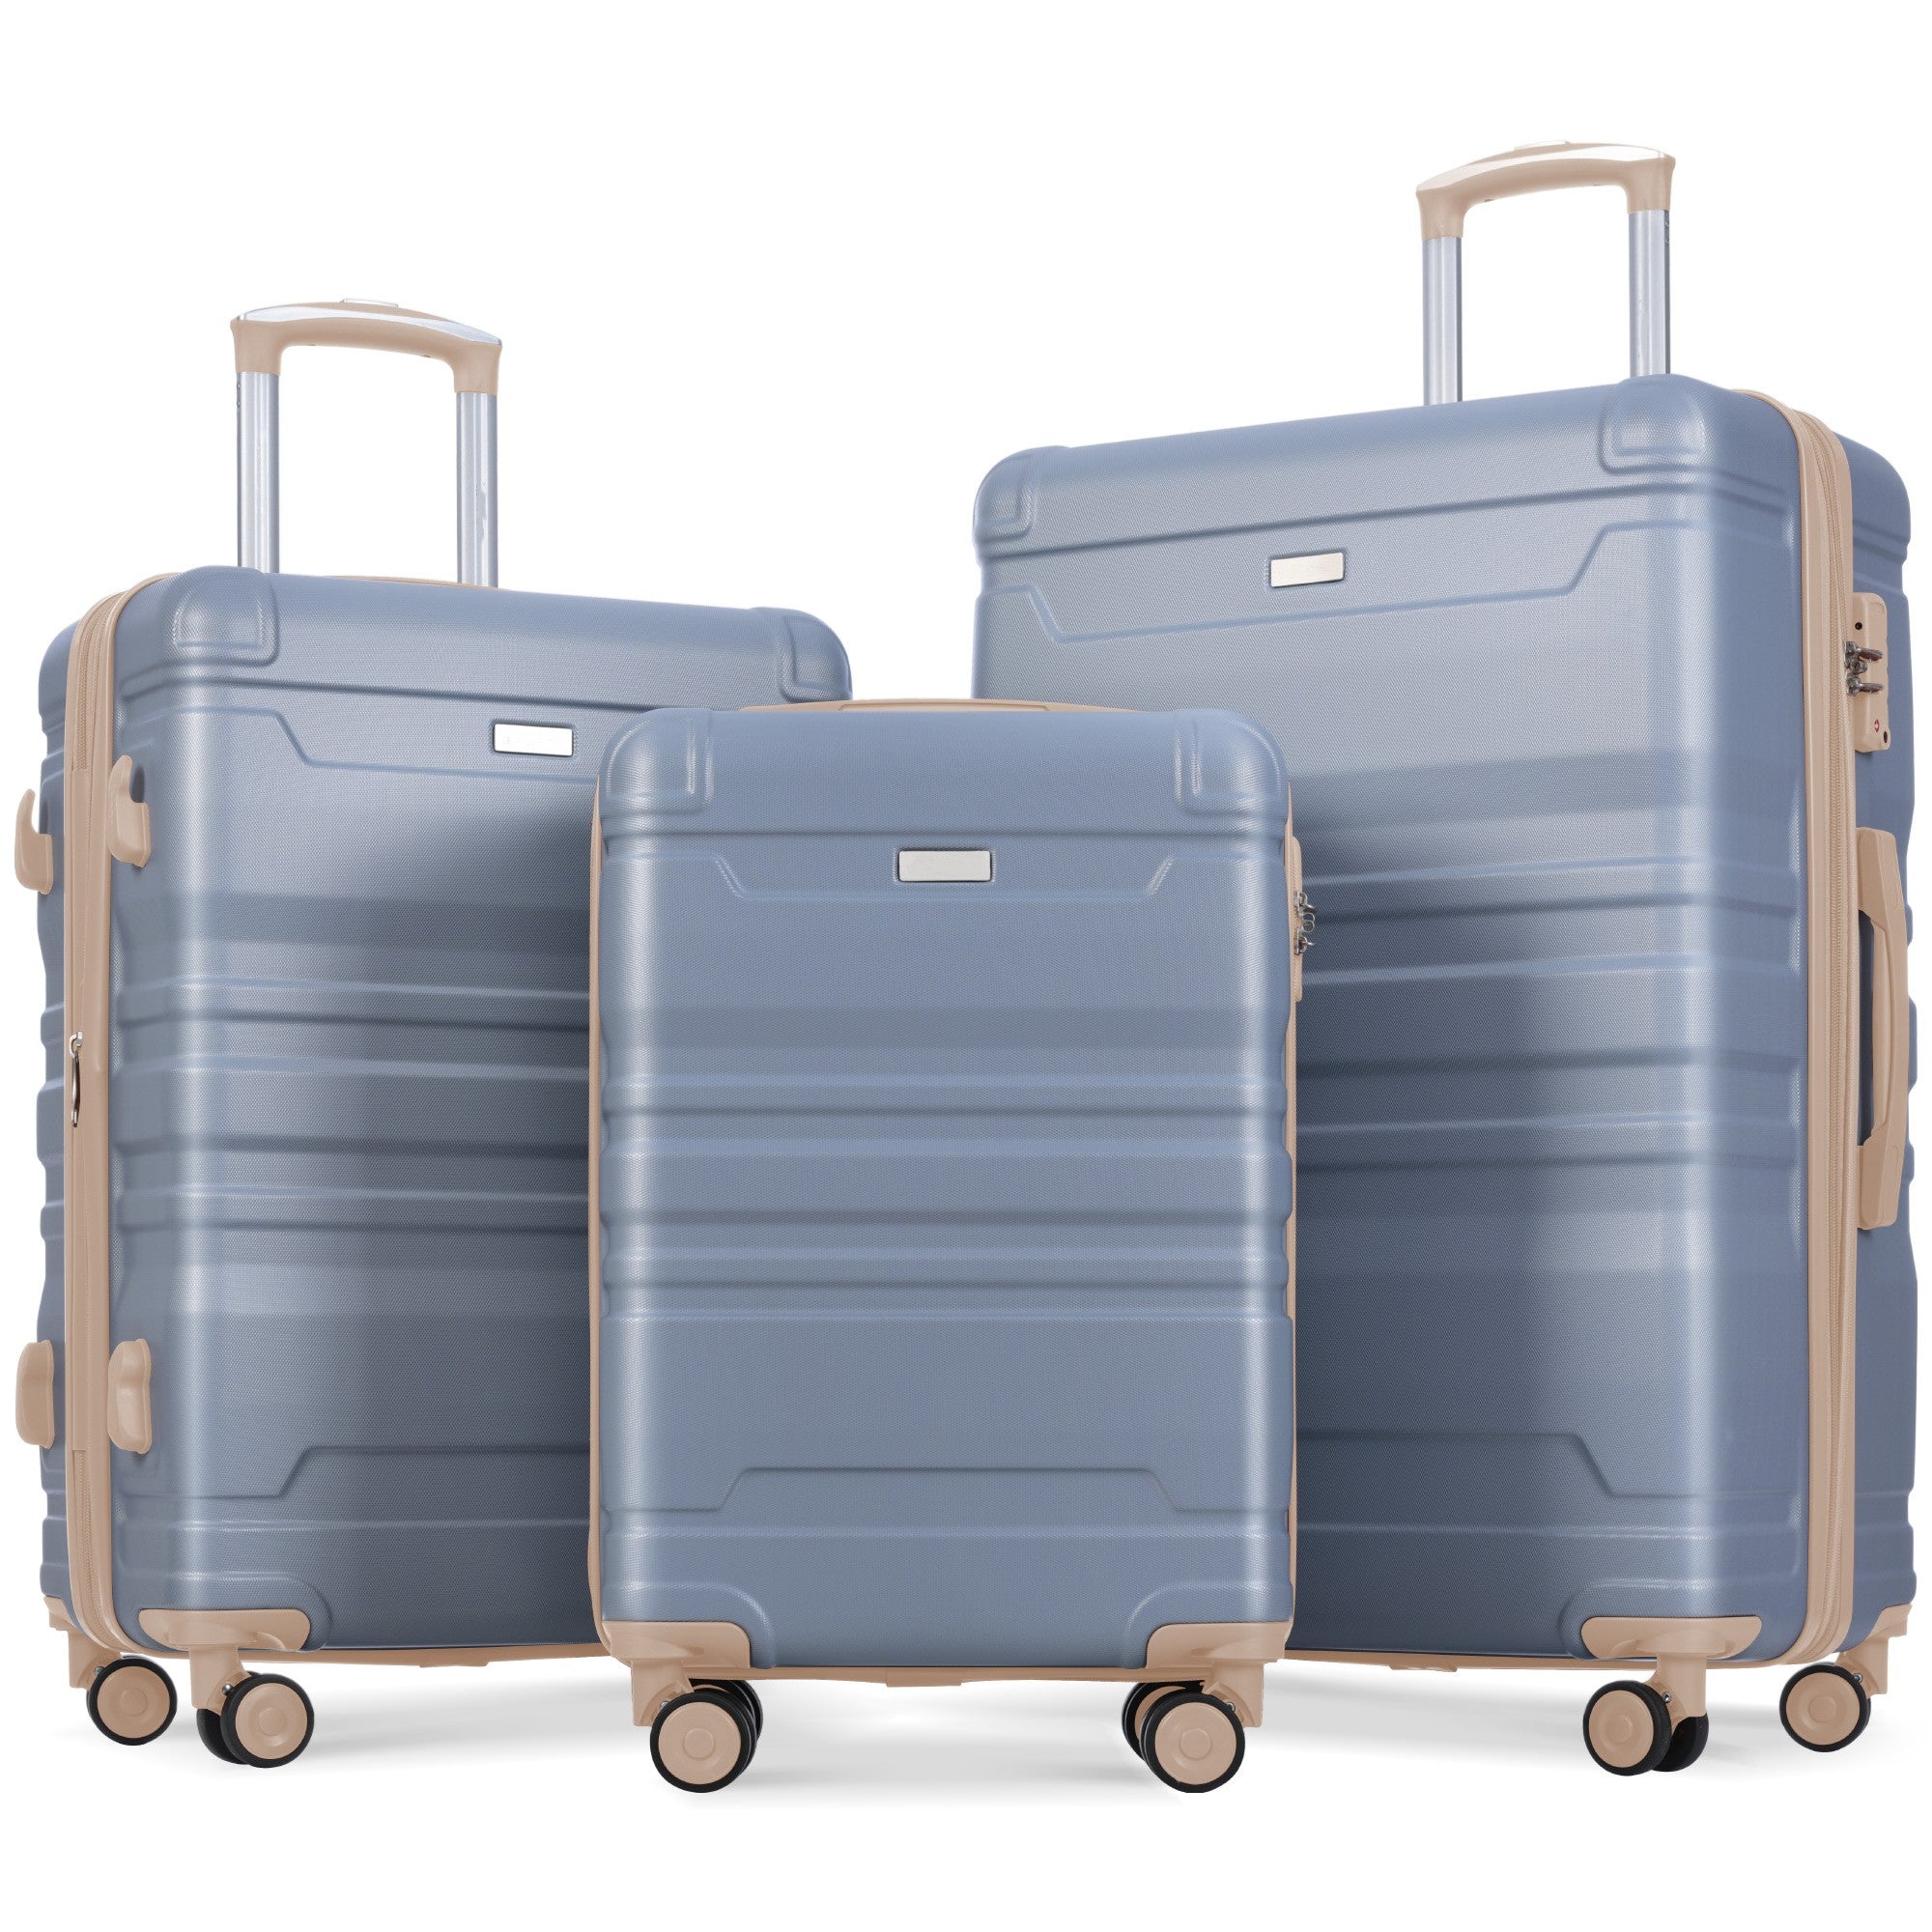 Luggage Sets New Model Expandable ABS Hardshell 3pcs Clearance Luggage (light blue and golden)